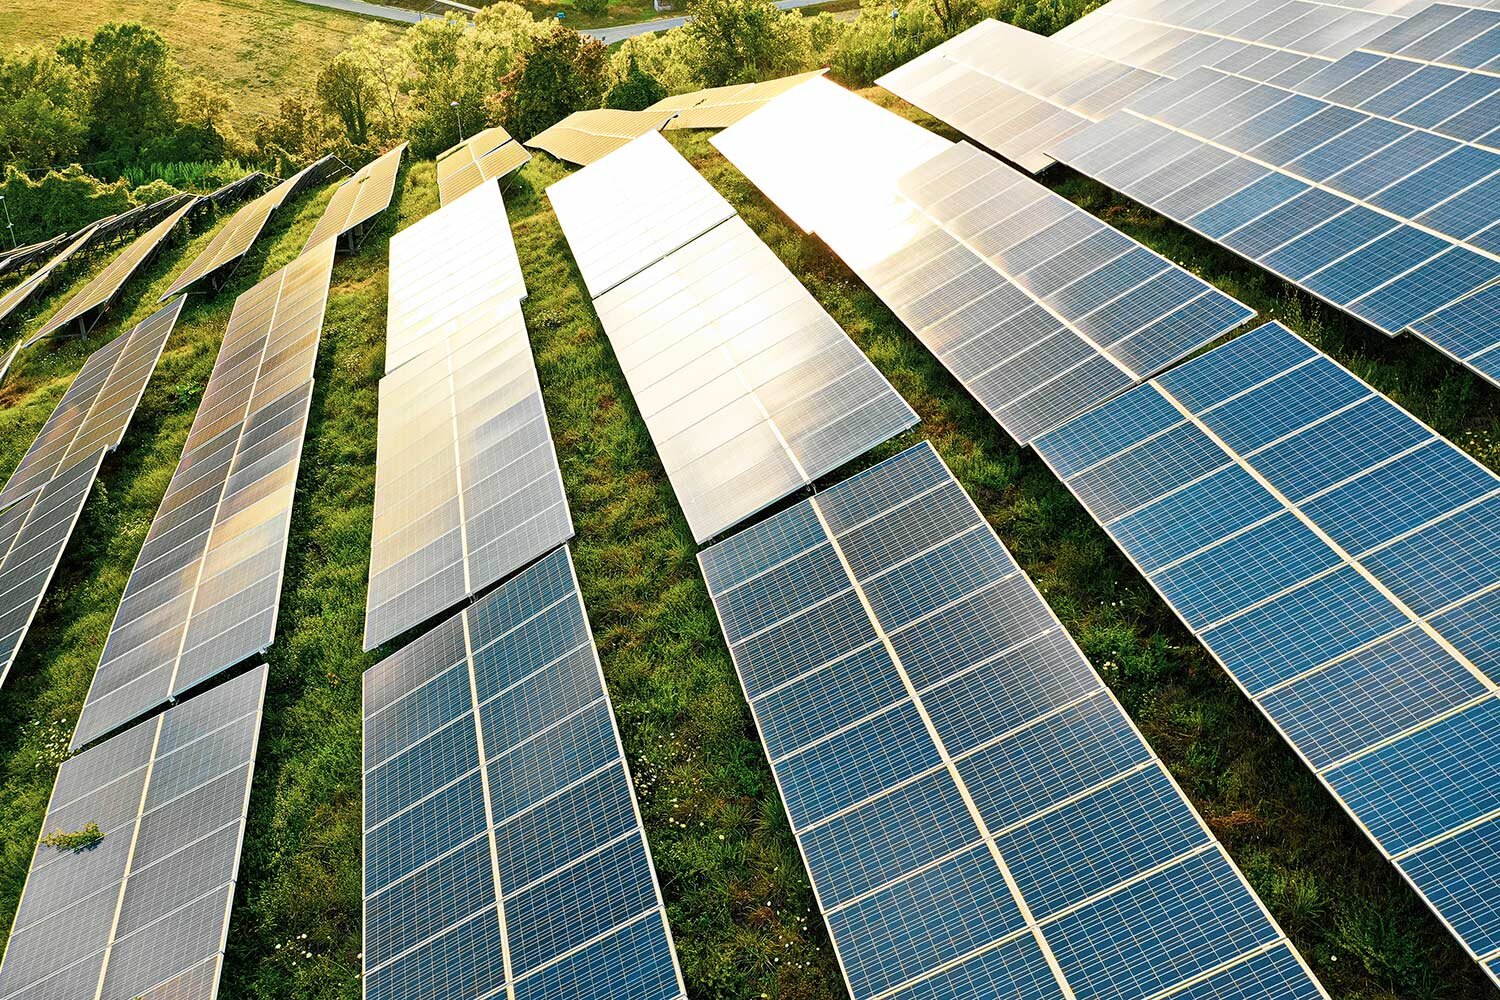 California Rule Facilitating the Recycling of Solar Panels Takes Effect January 1, 2021